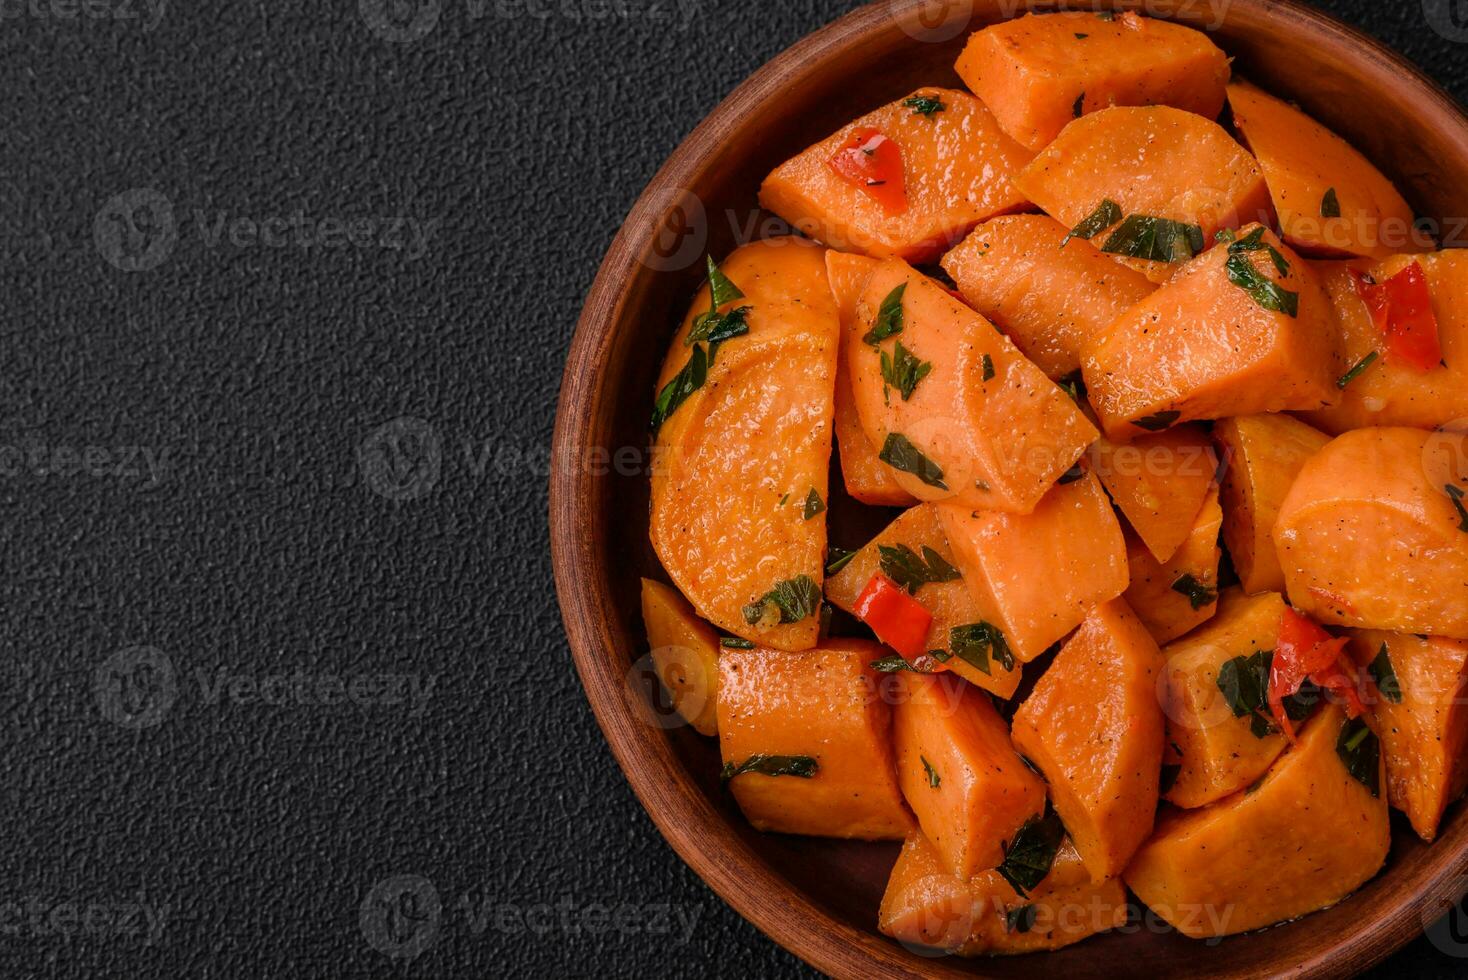 Delicious stewed sweet potato with salt, spices and herbs photo